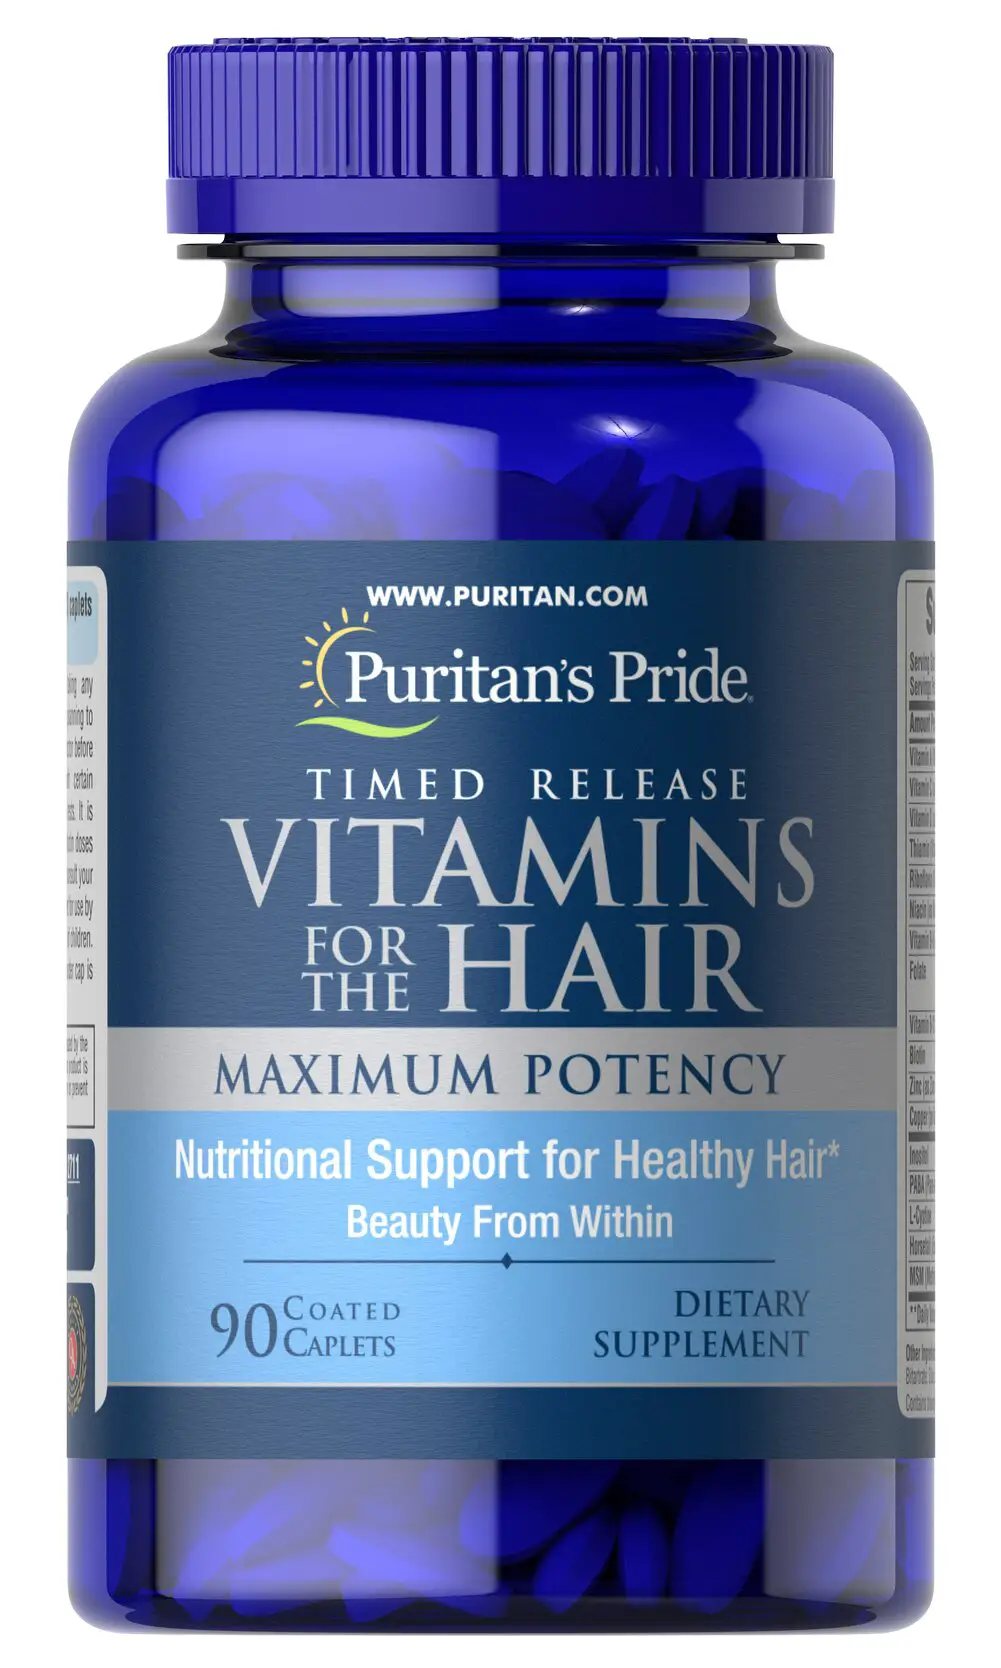 Vitamins for the Hair Timed Release 90 Caplets